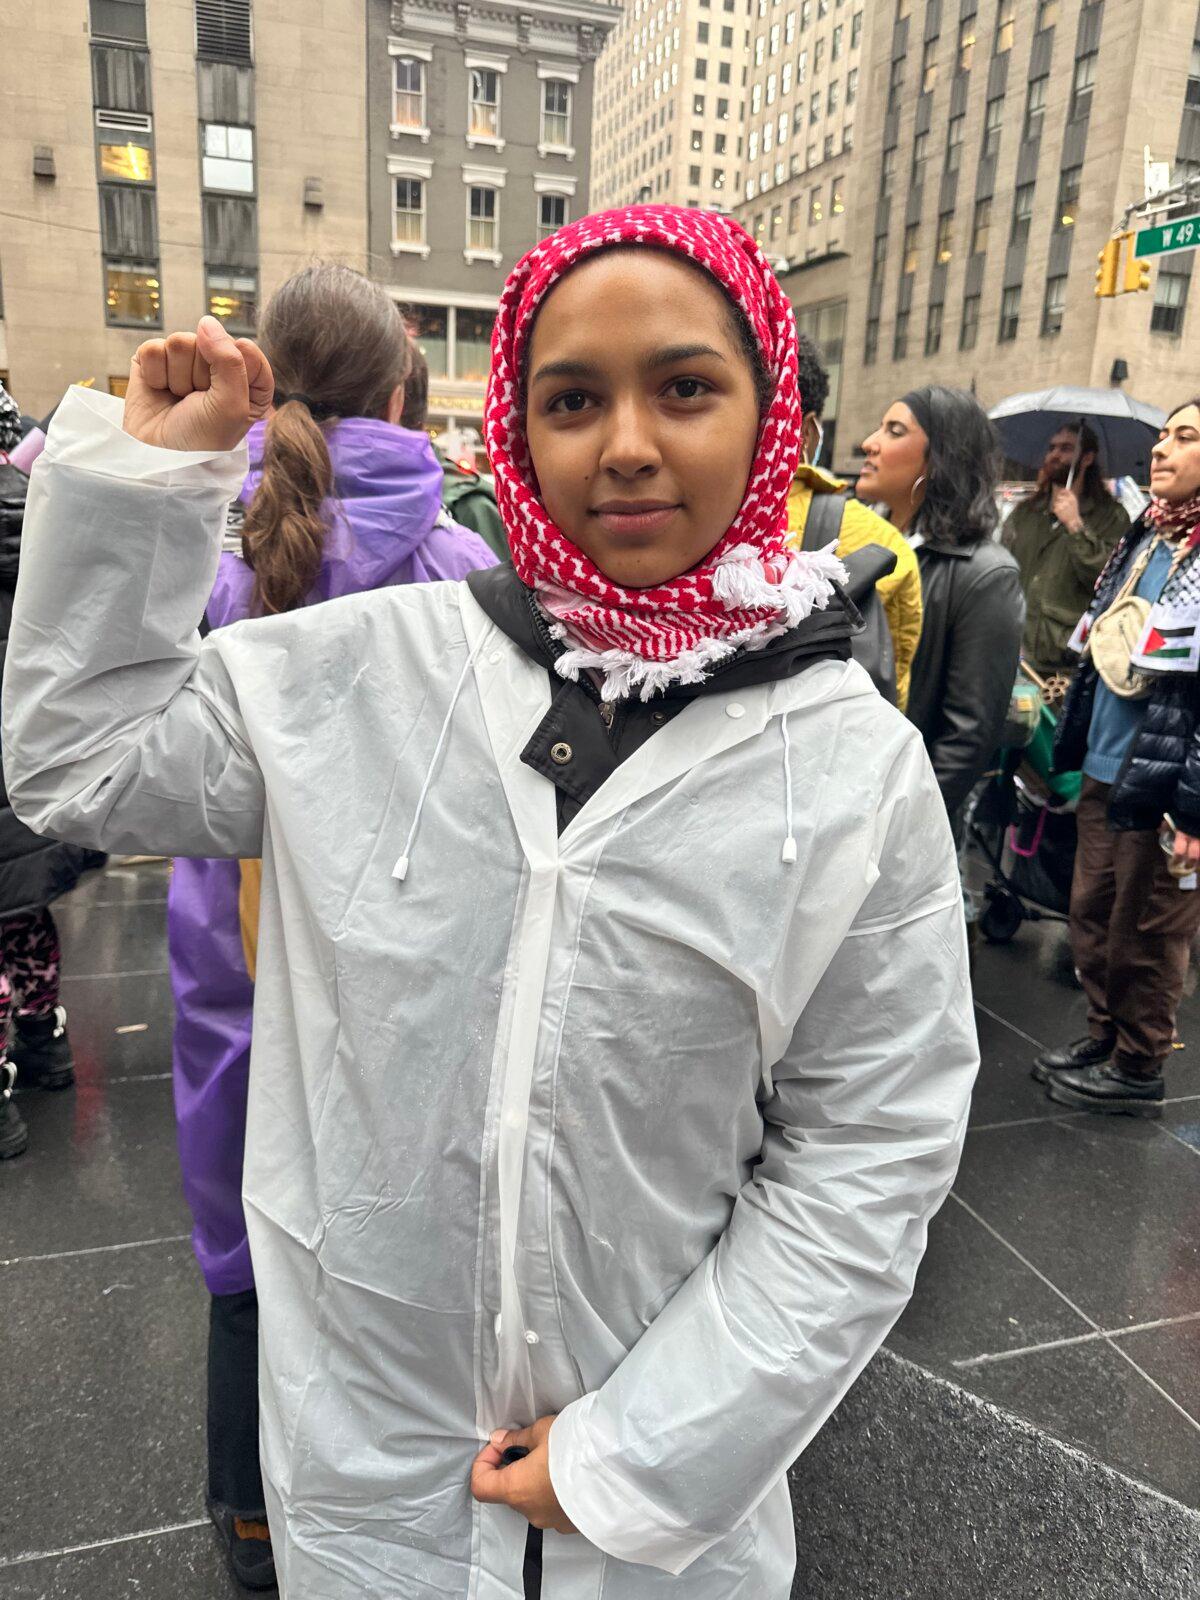 Reisha Martinez attends the "Abandon Biden" rally in front of Radio City Music Hall in New York on March 28, 2024. (Juliette Fairley/The Epoch Times)